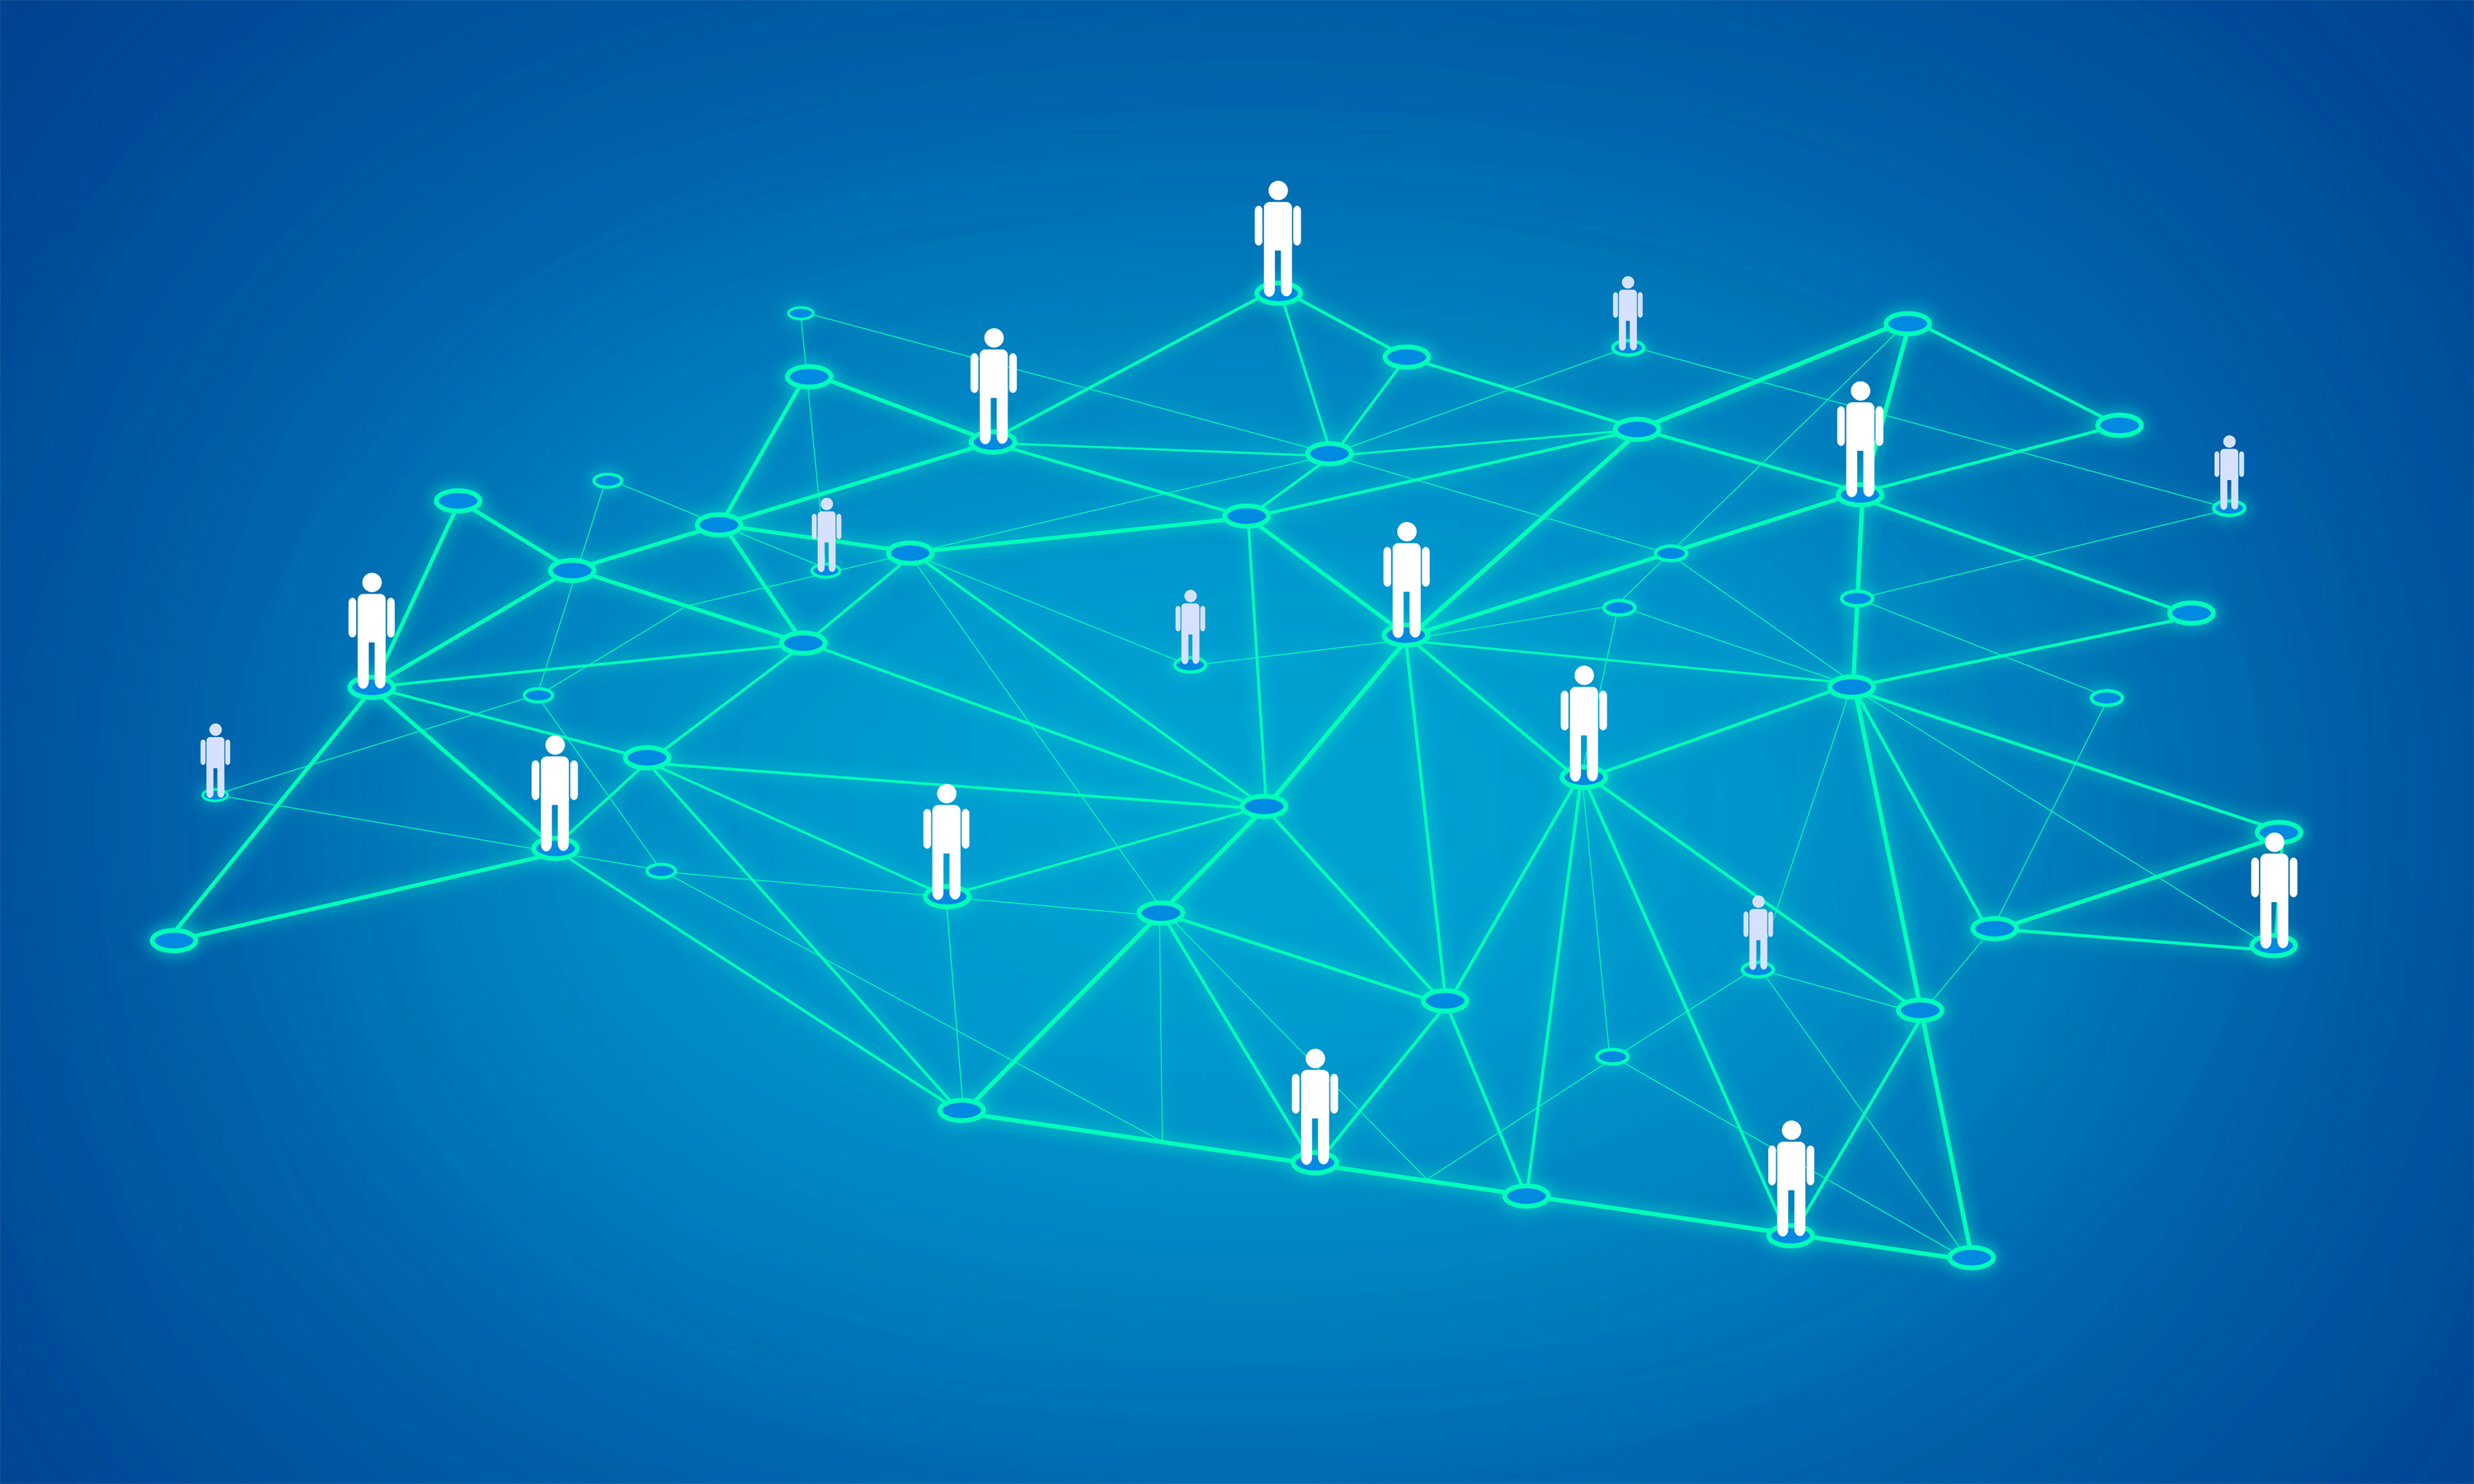 Linked in a network - social network and social connections concept photo